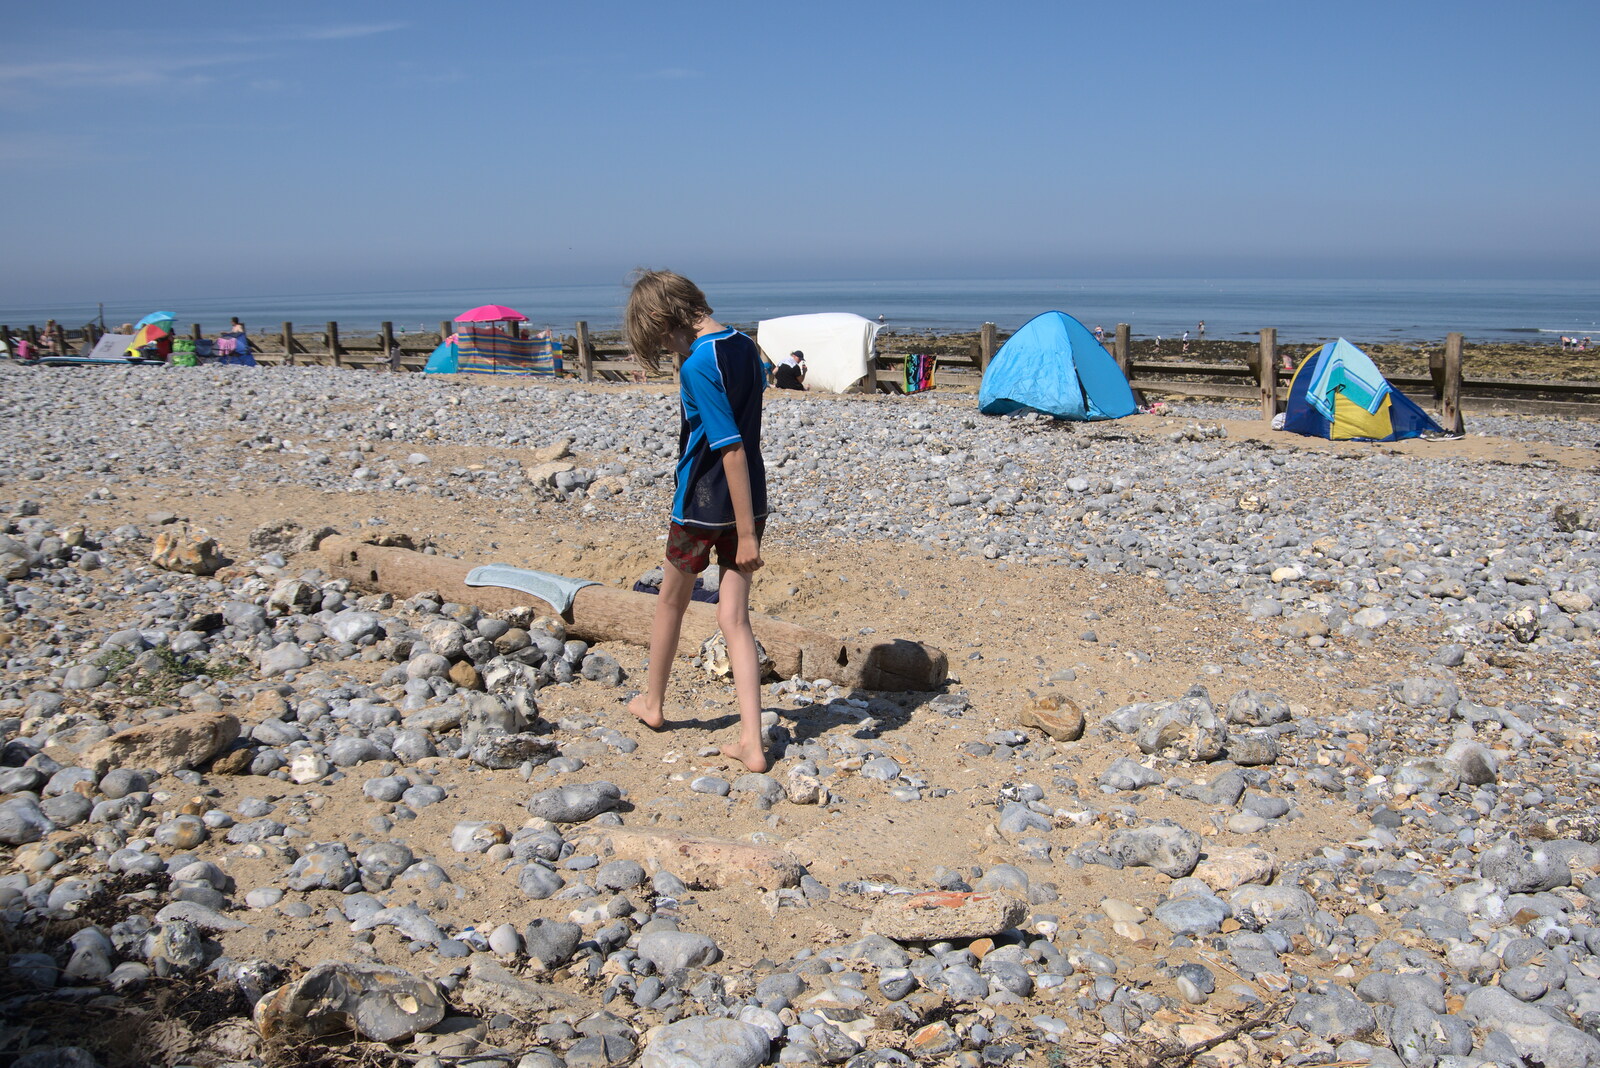 Harry roams around on the beach from Camping at Forest Park, Cromer, Norfolk - 12th August 2022